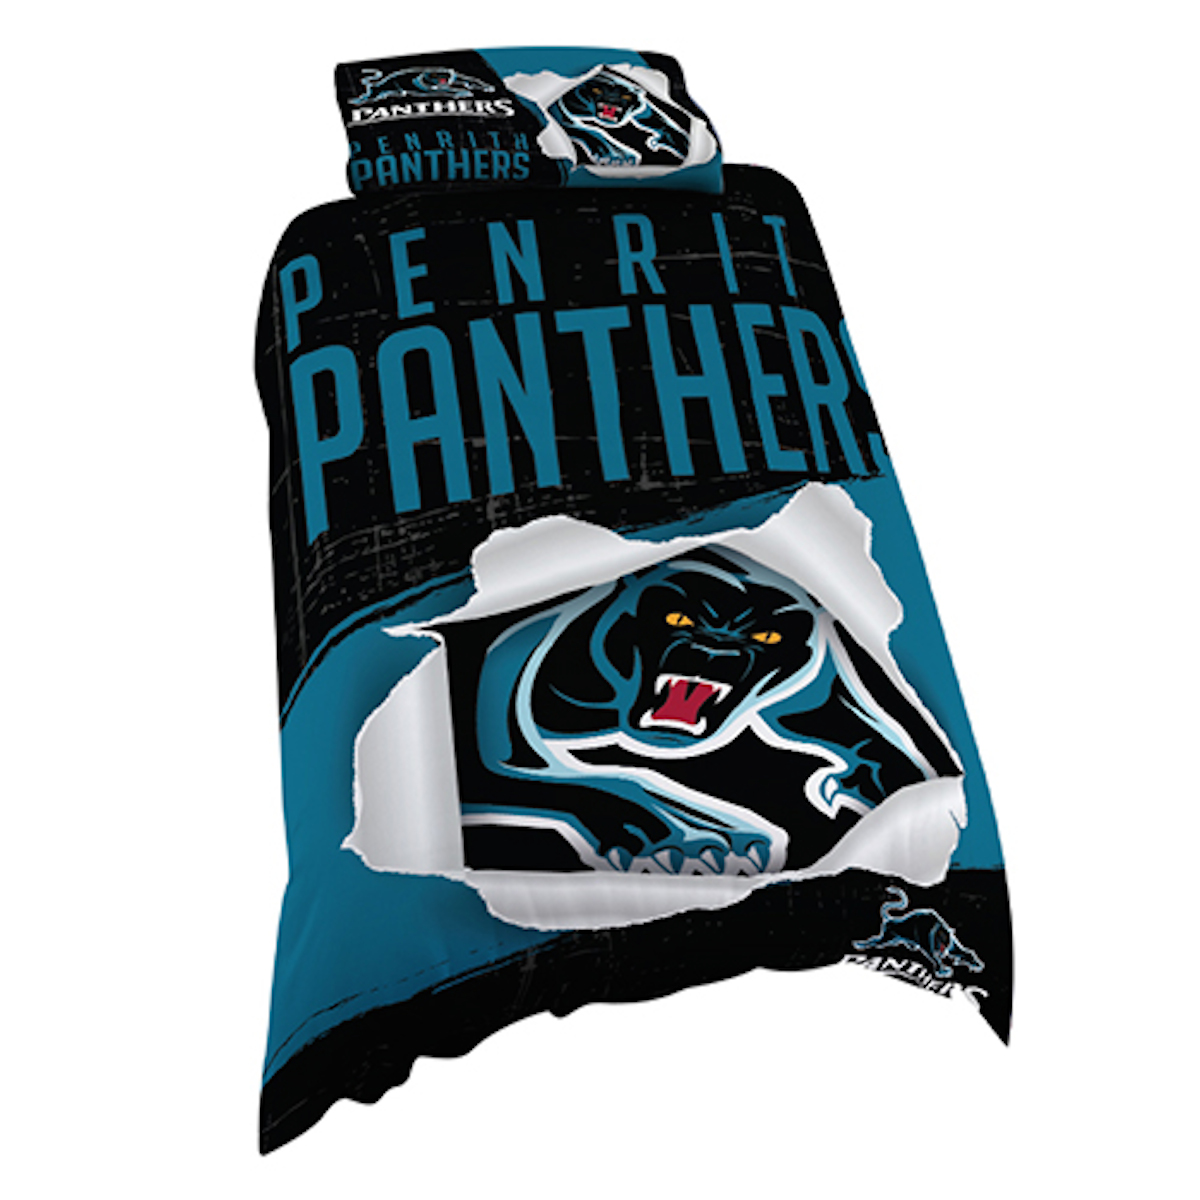 Penrith Panthers NRL Logo Design Quilt Doona Cover ...